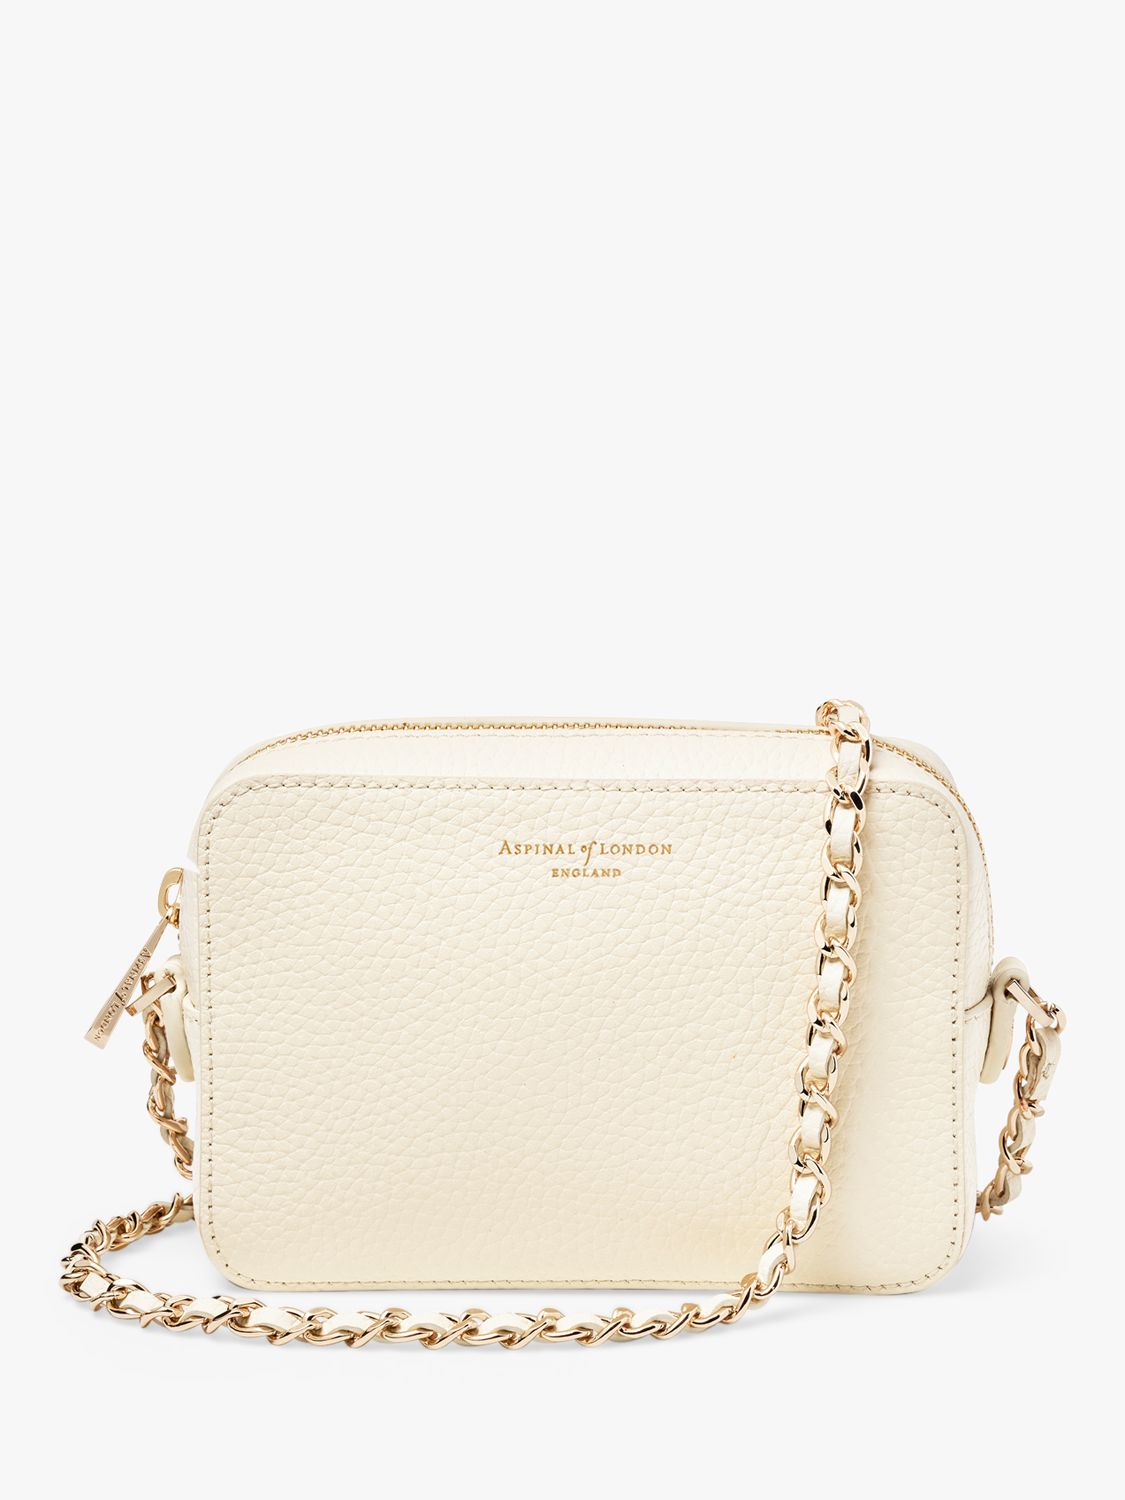 Milly Bag in Ivory Pebble